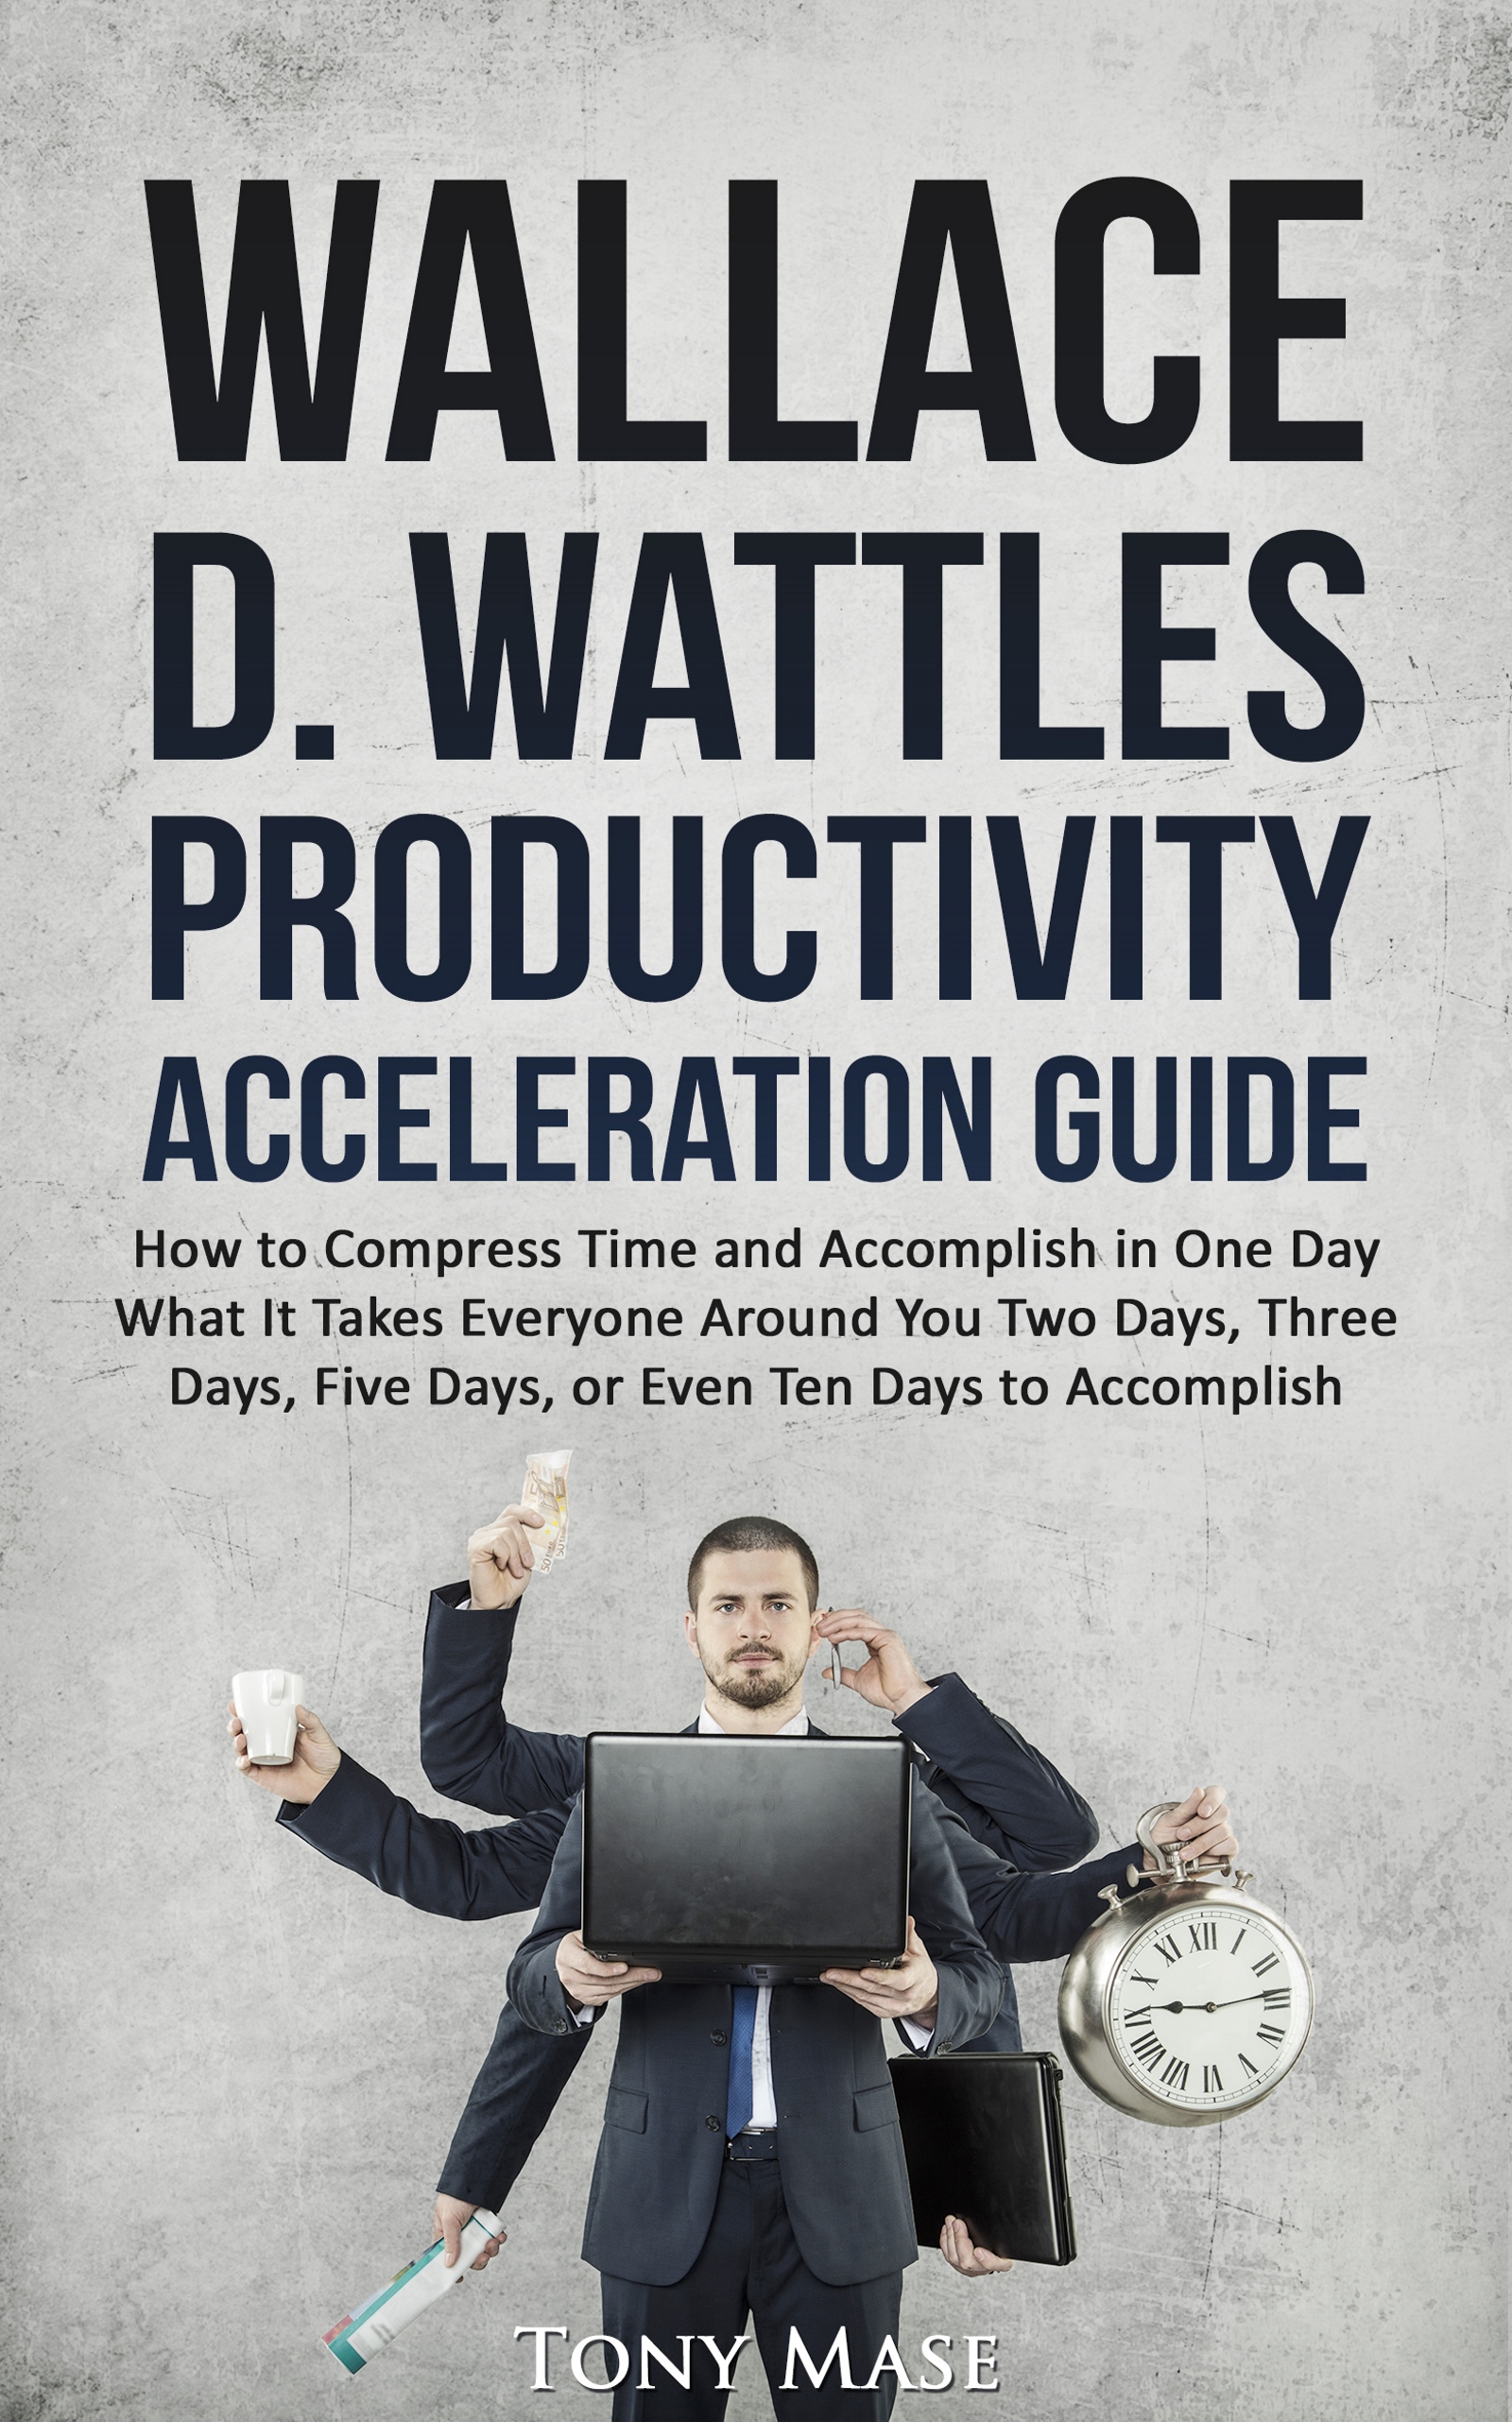 FREE: Wallace D. Wattles Productivity Acceleration Guide by Tony Mase